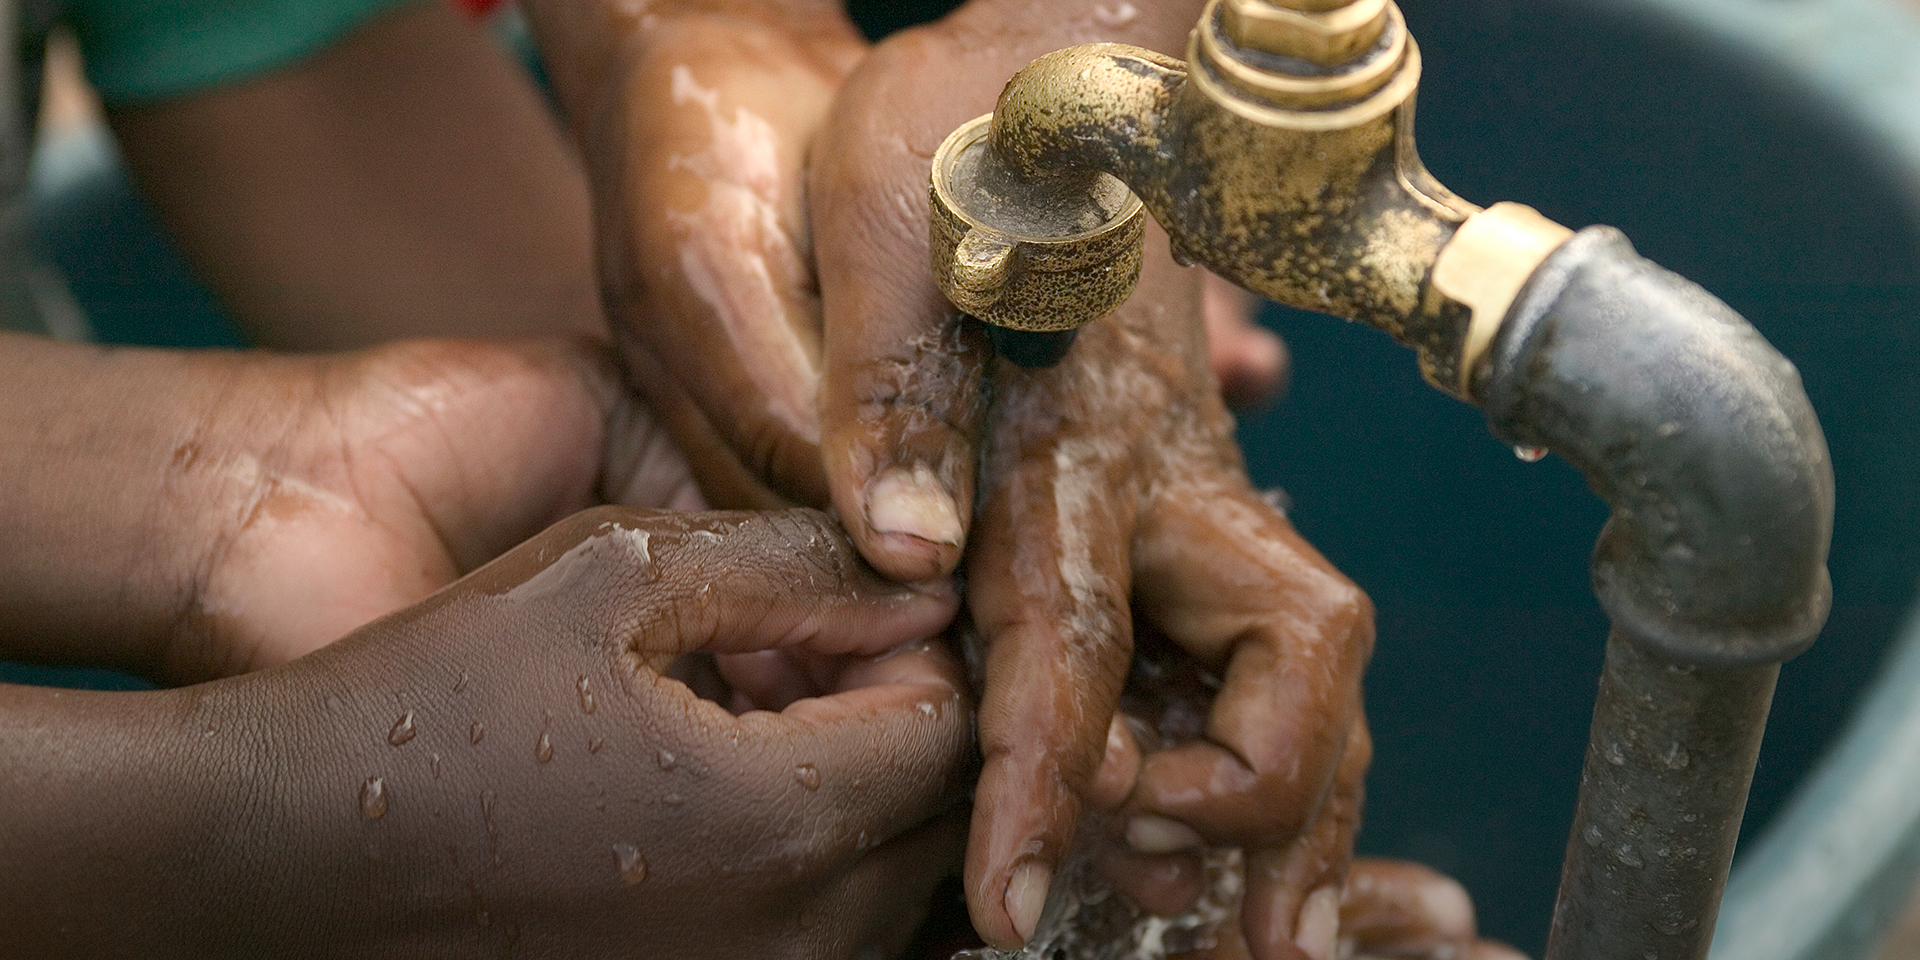 A close-up image of several people washing their hands under a waterspout.